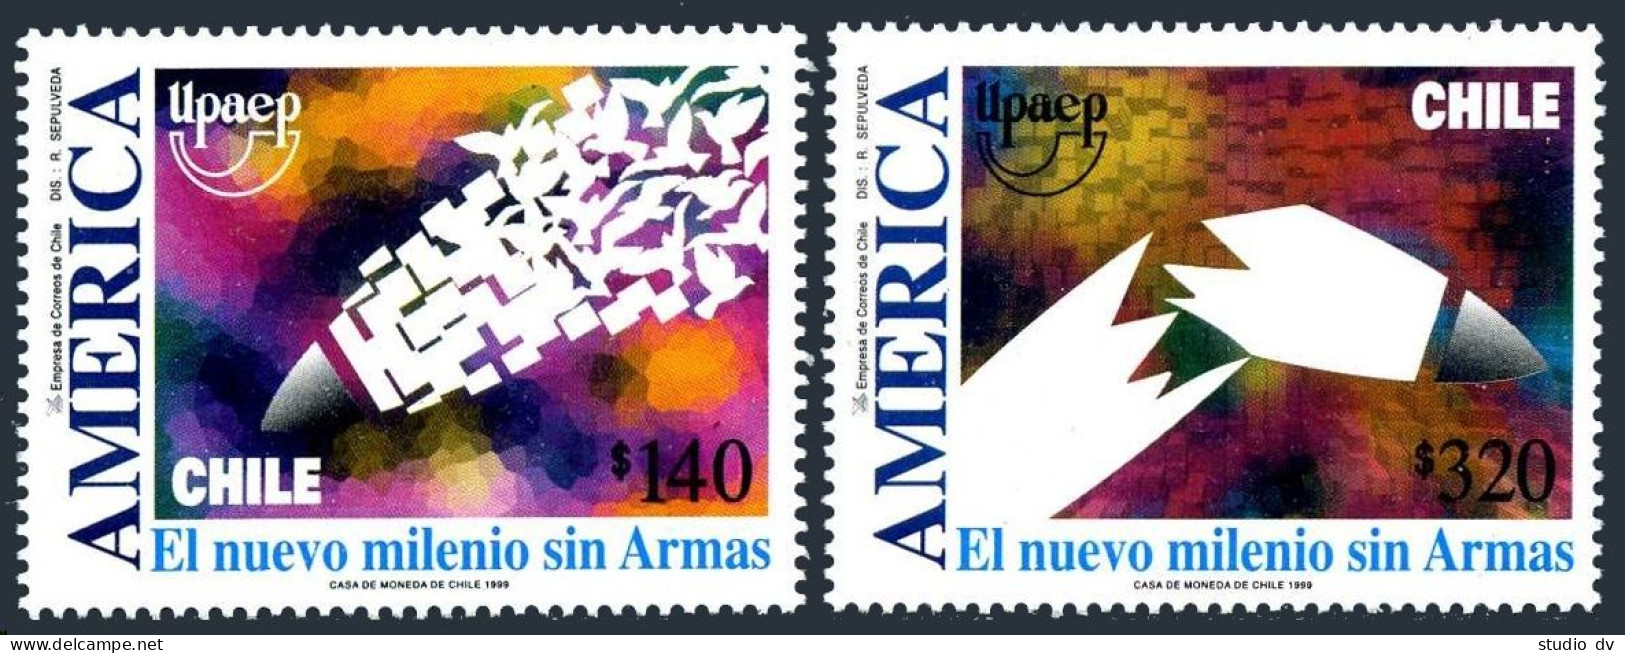 Chile 1304-1305,MNH. America UPAEP-1999.New Millennium Without Arms.Broken Bomb. - Chili